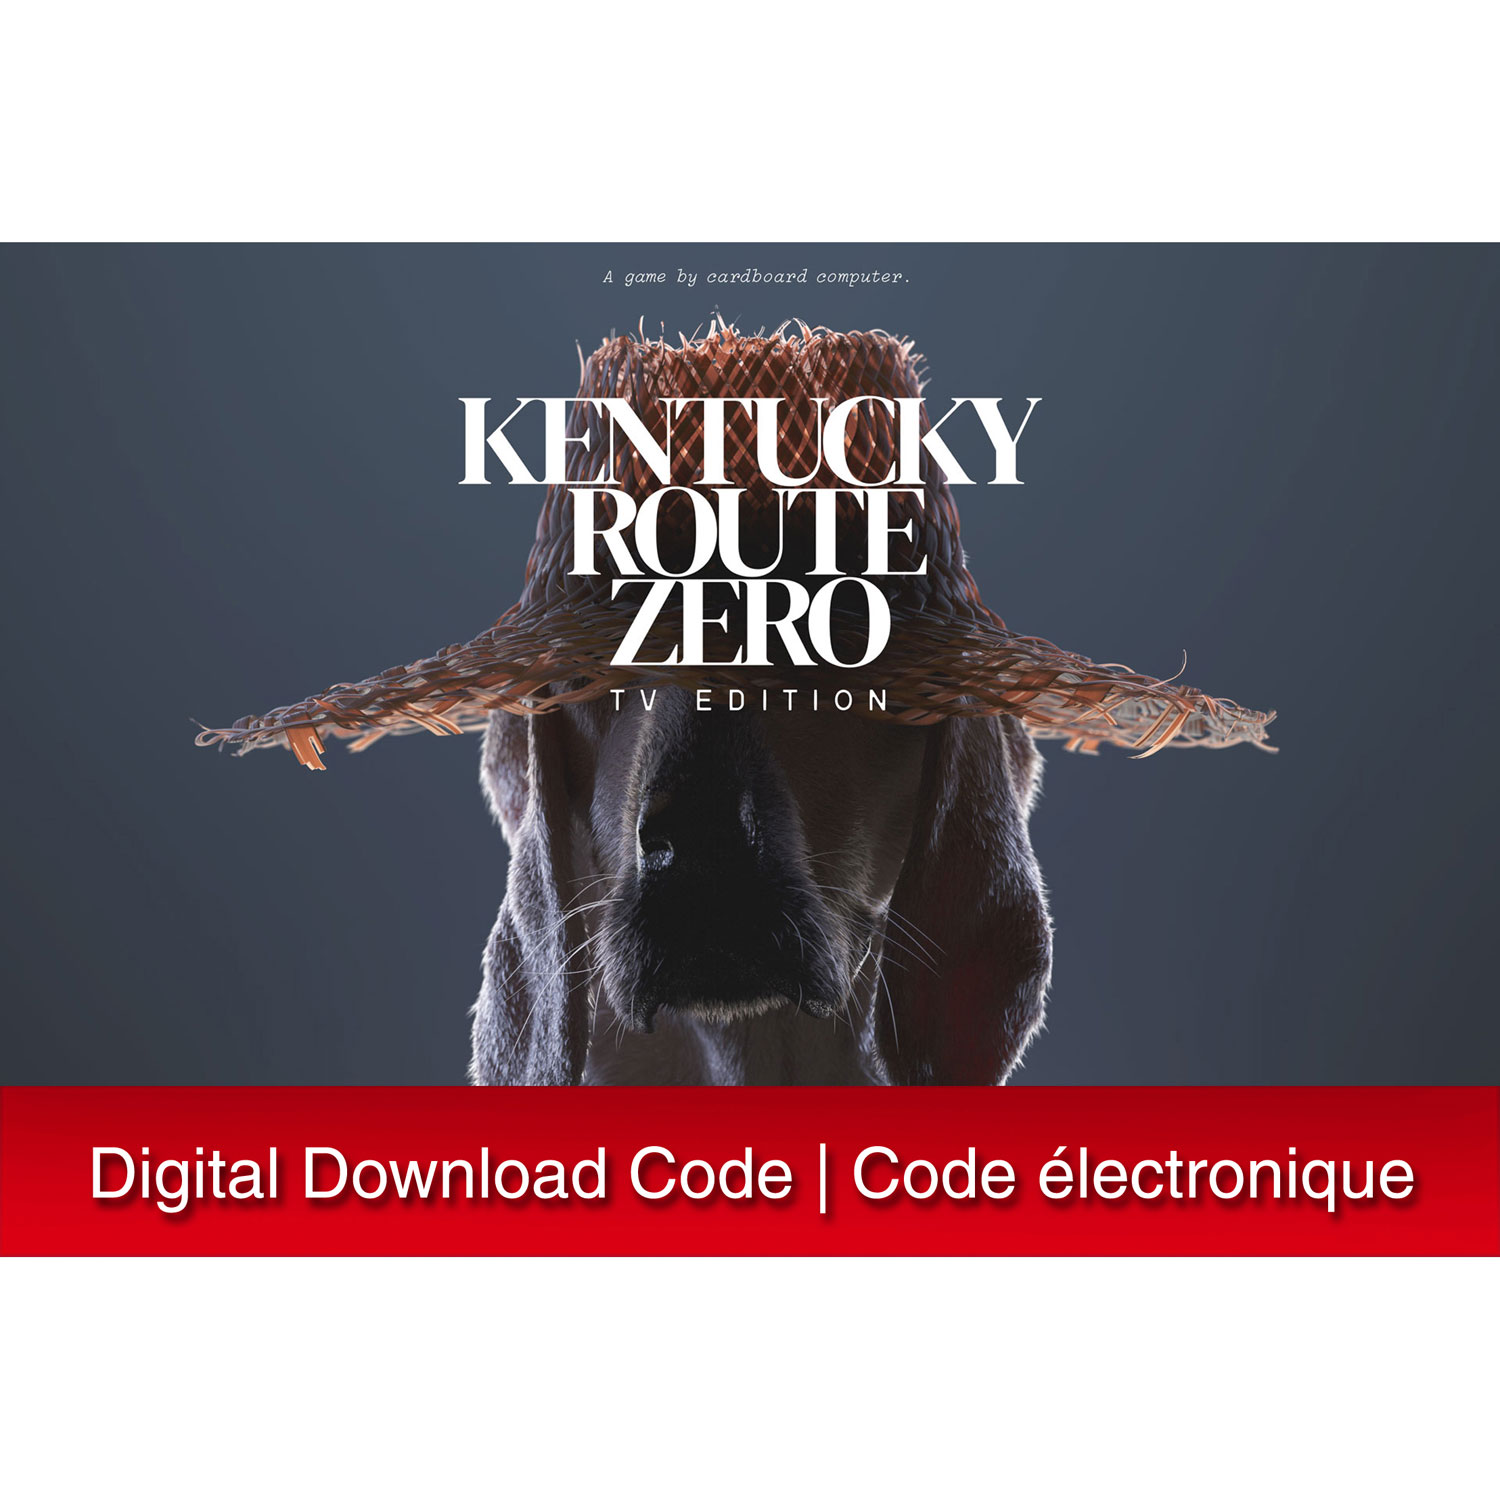 Kentucky Route Zero TV Edition (Switch) - Digital Download